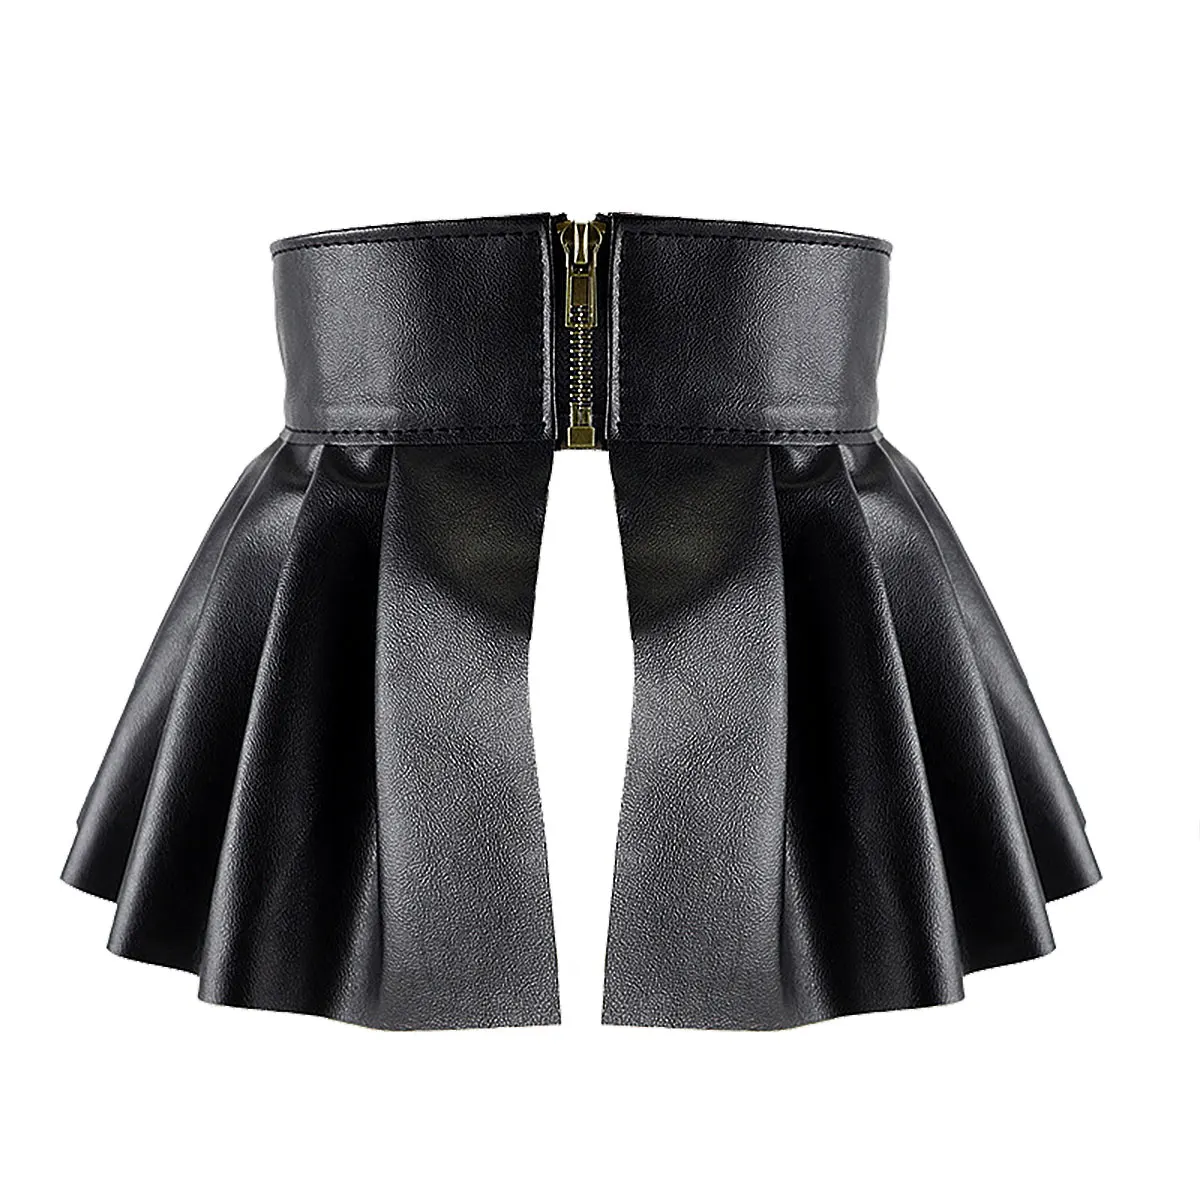 Womens Ladies Sexy Skirts Ladies Faux Leather Pleated Skirts Split Embellished Studded A-Line Mini Skirt for Parties Clubwear